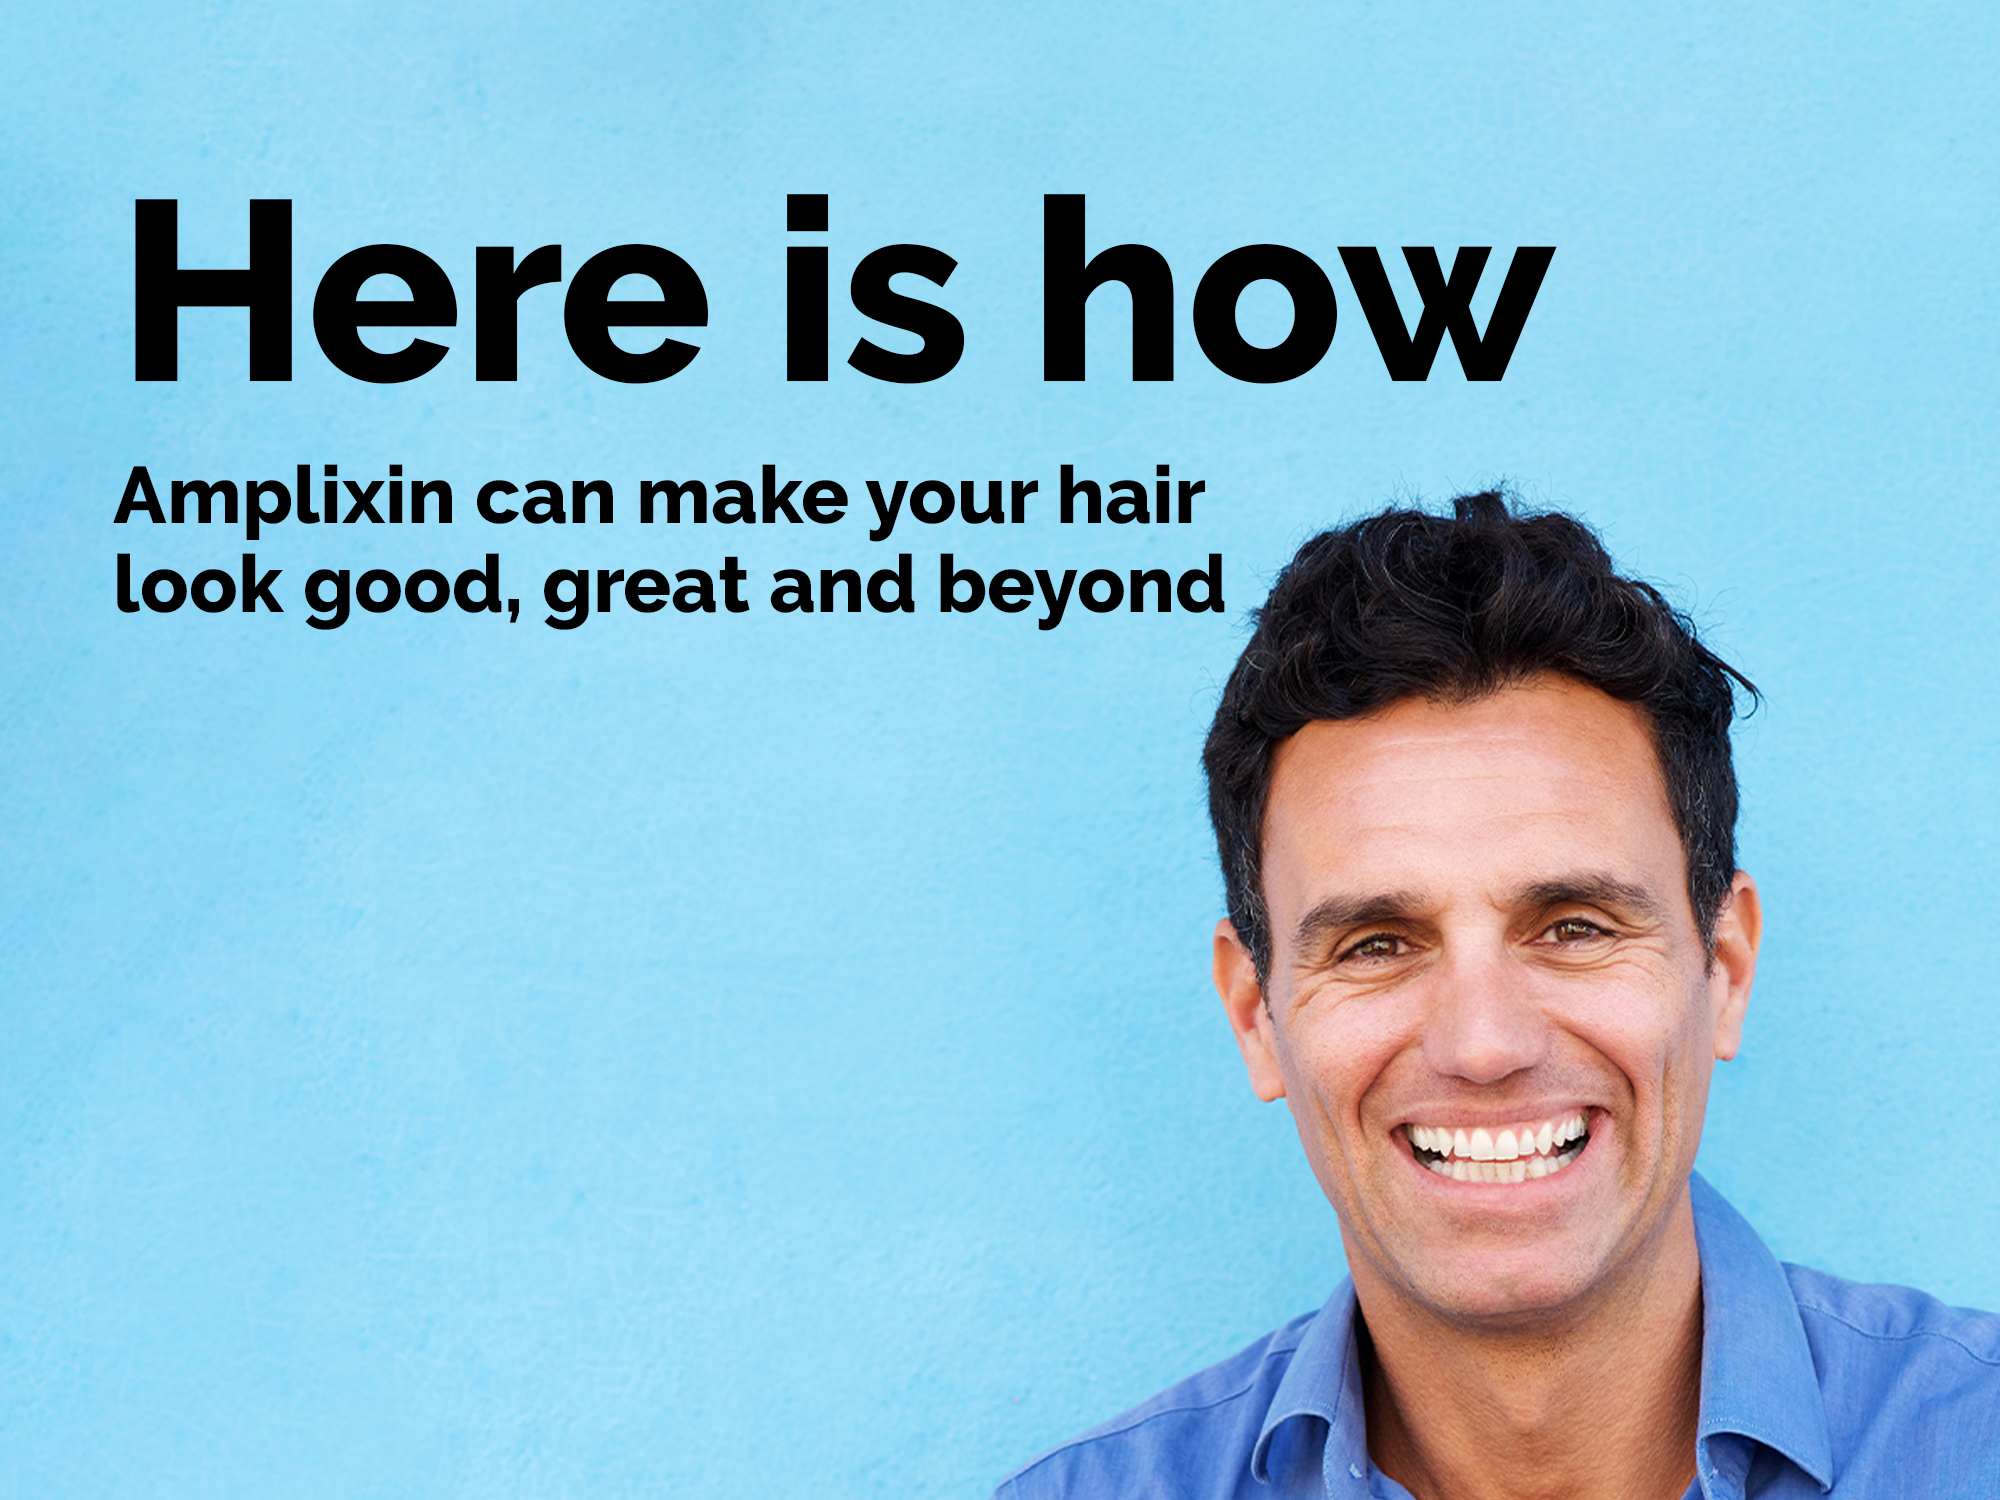 Here is how Amplixin can make your hair look good, great and beyond